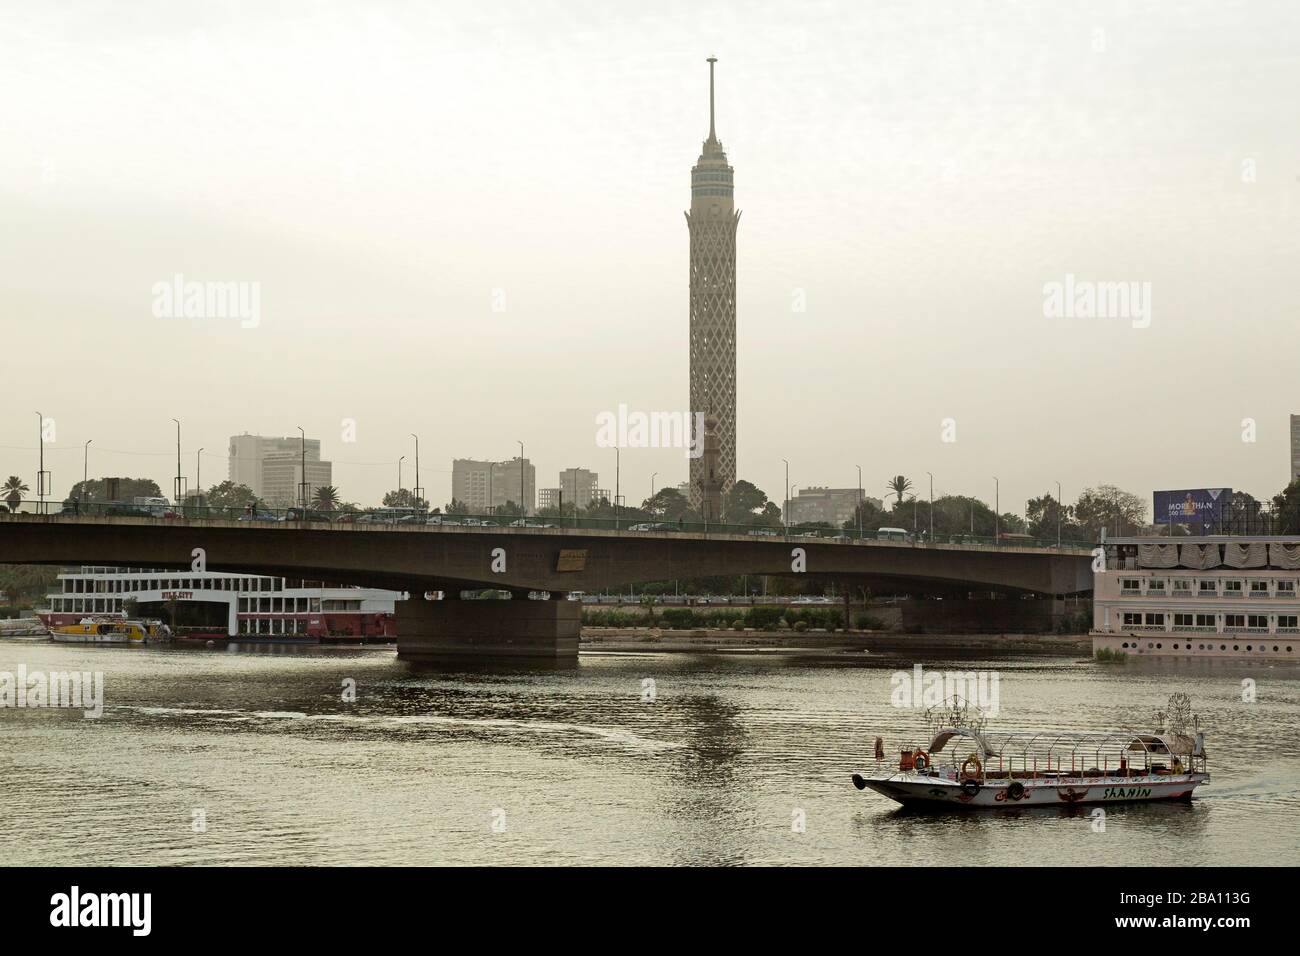 A boat on the River Nile by the 6th October Bridge in Cairo, Egypt. The Cairo Tower, known as Nasser's Pineapple, dominates the urban landscape. Stock Photo